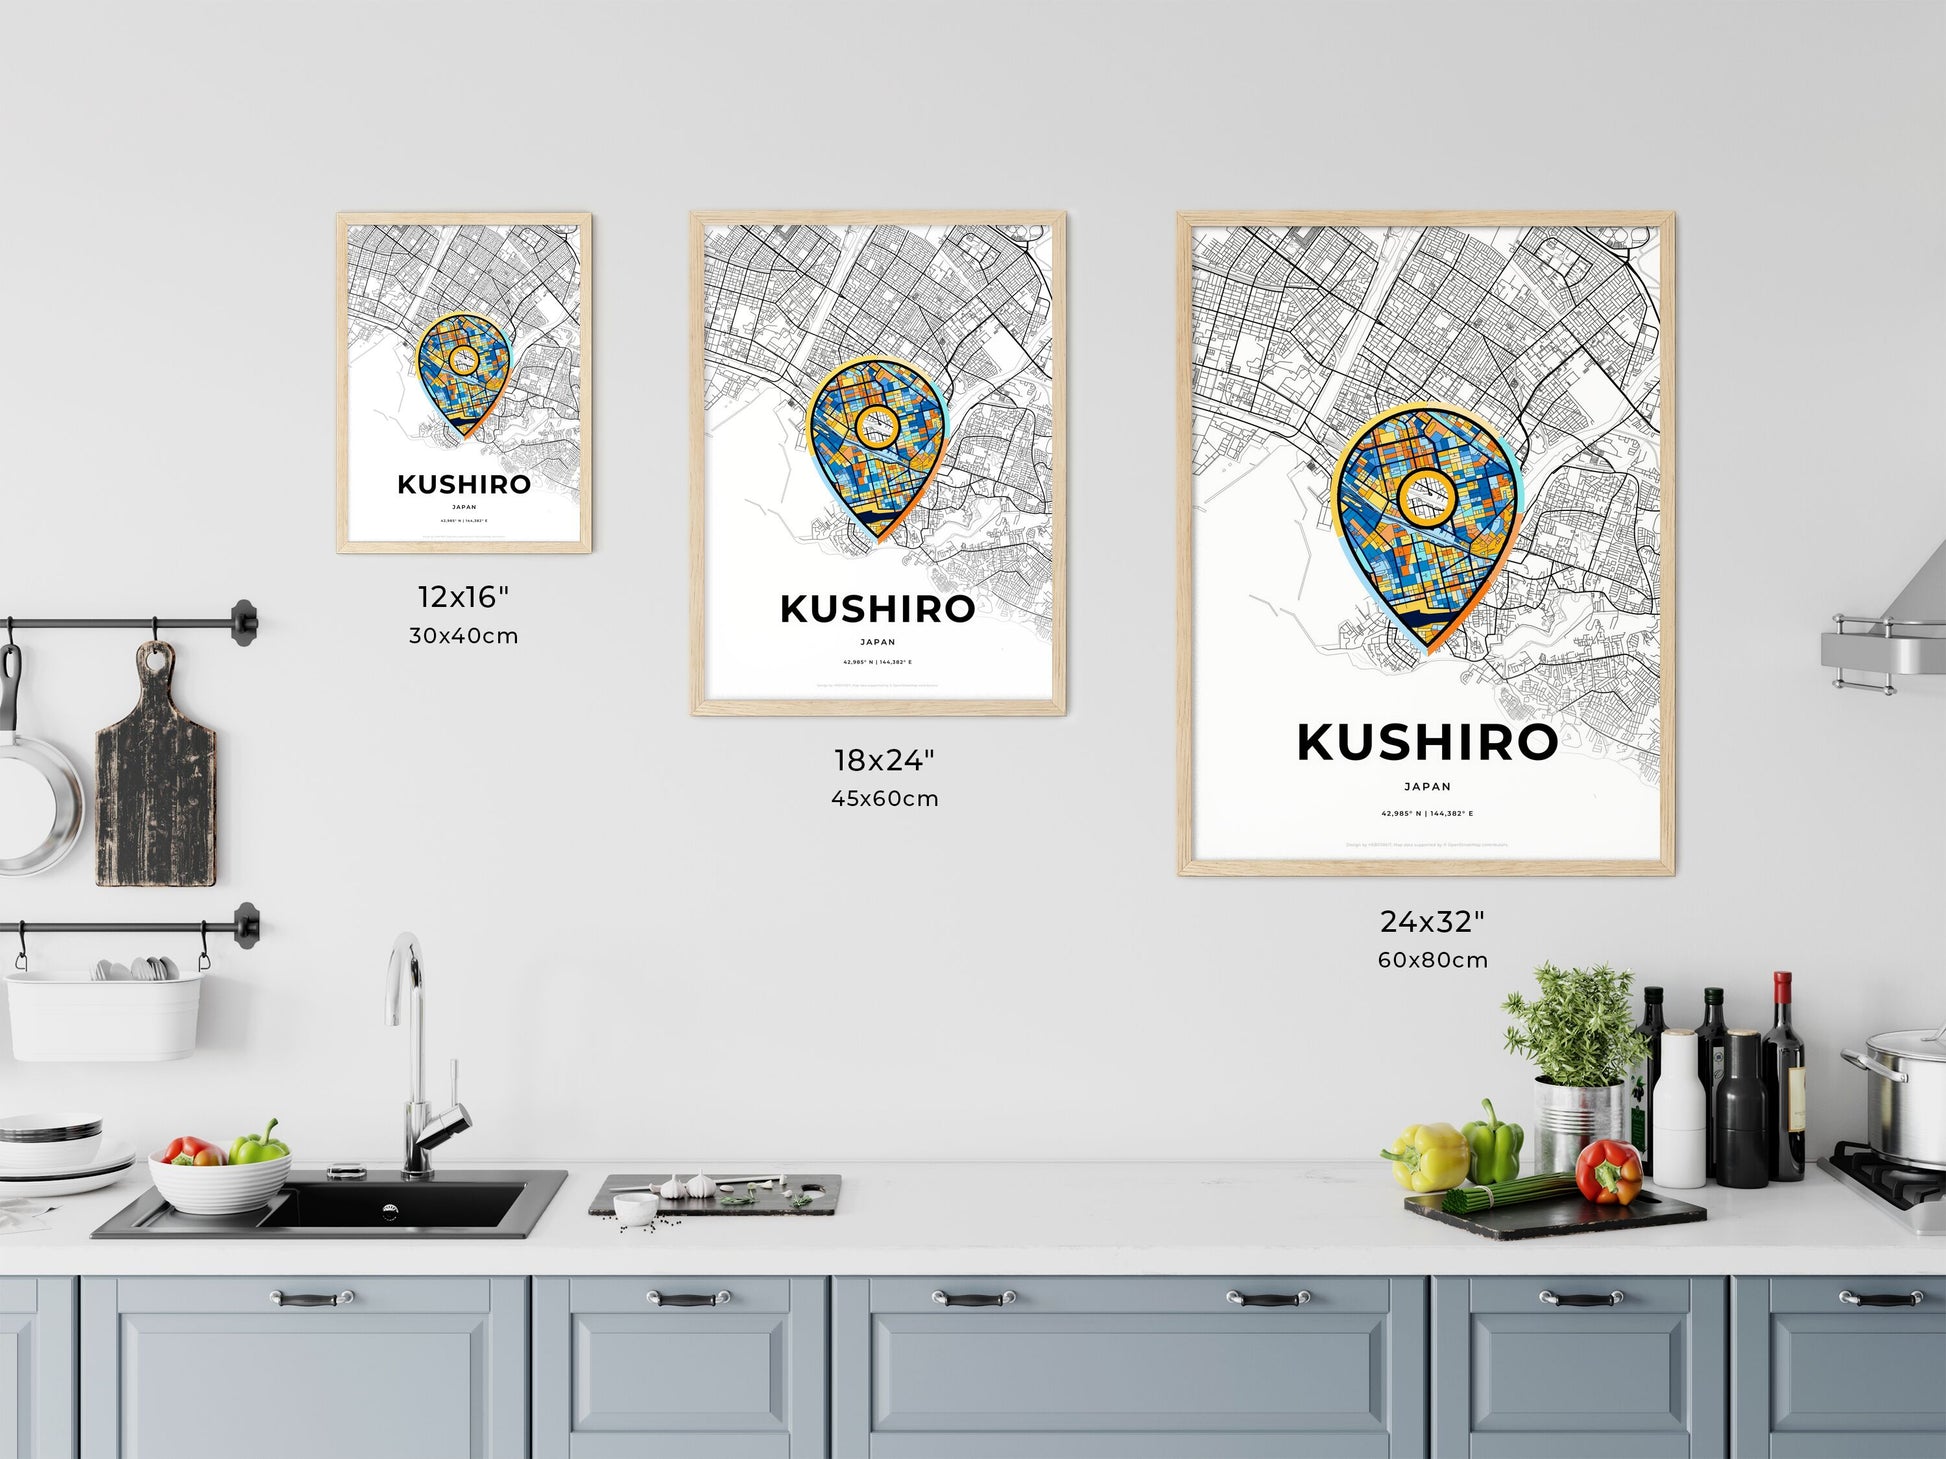 KUSHIRO JAPAN minimal art map with a colorful icon. Where it all began, Couple map gift.